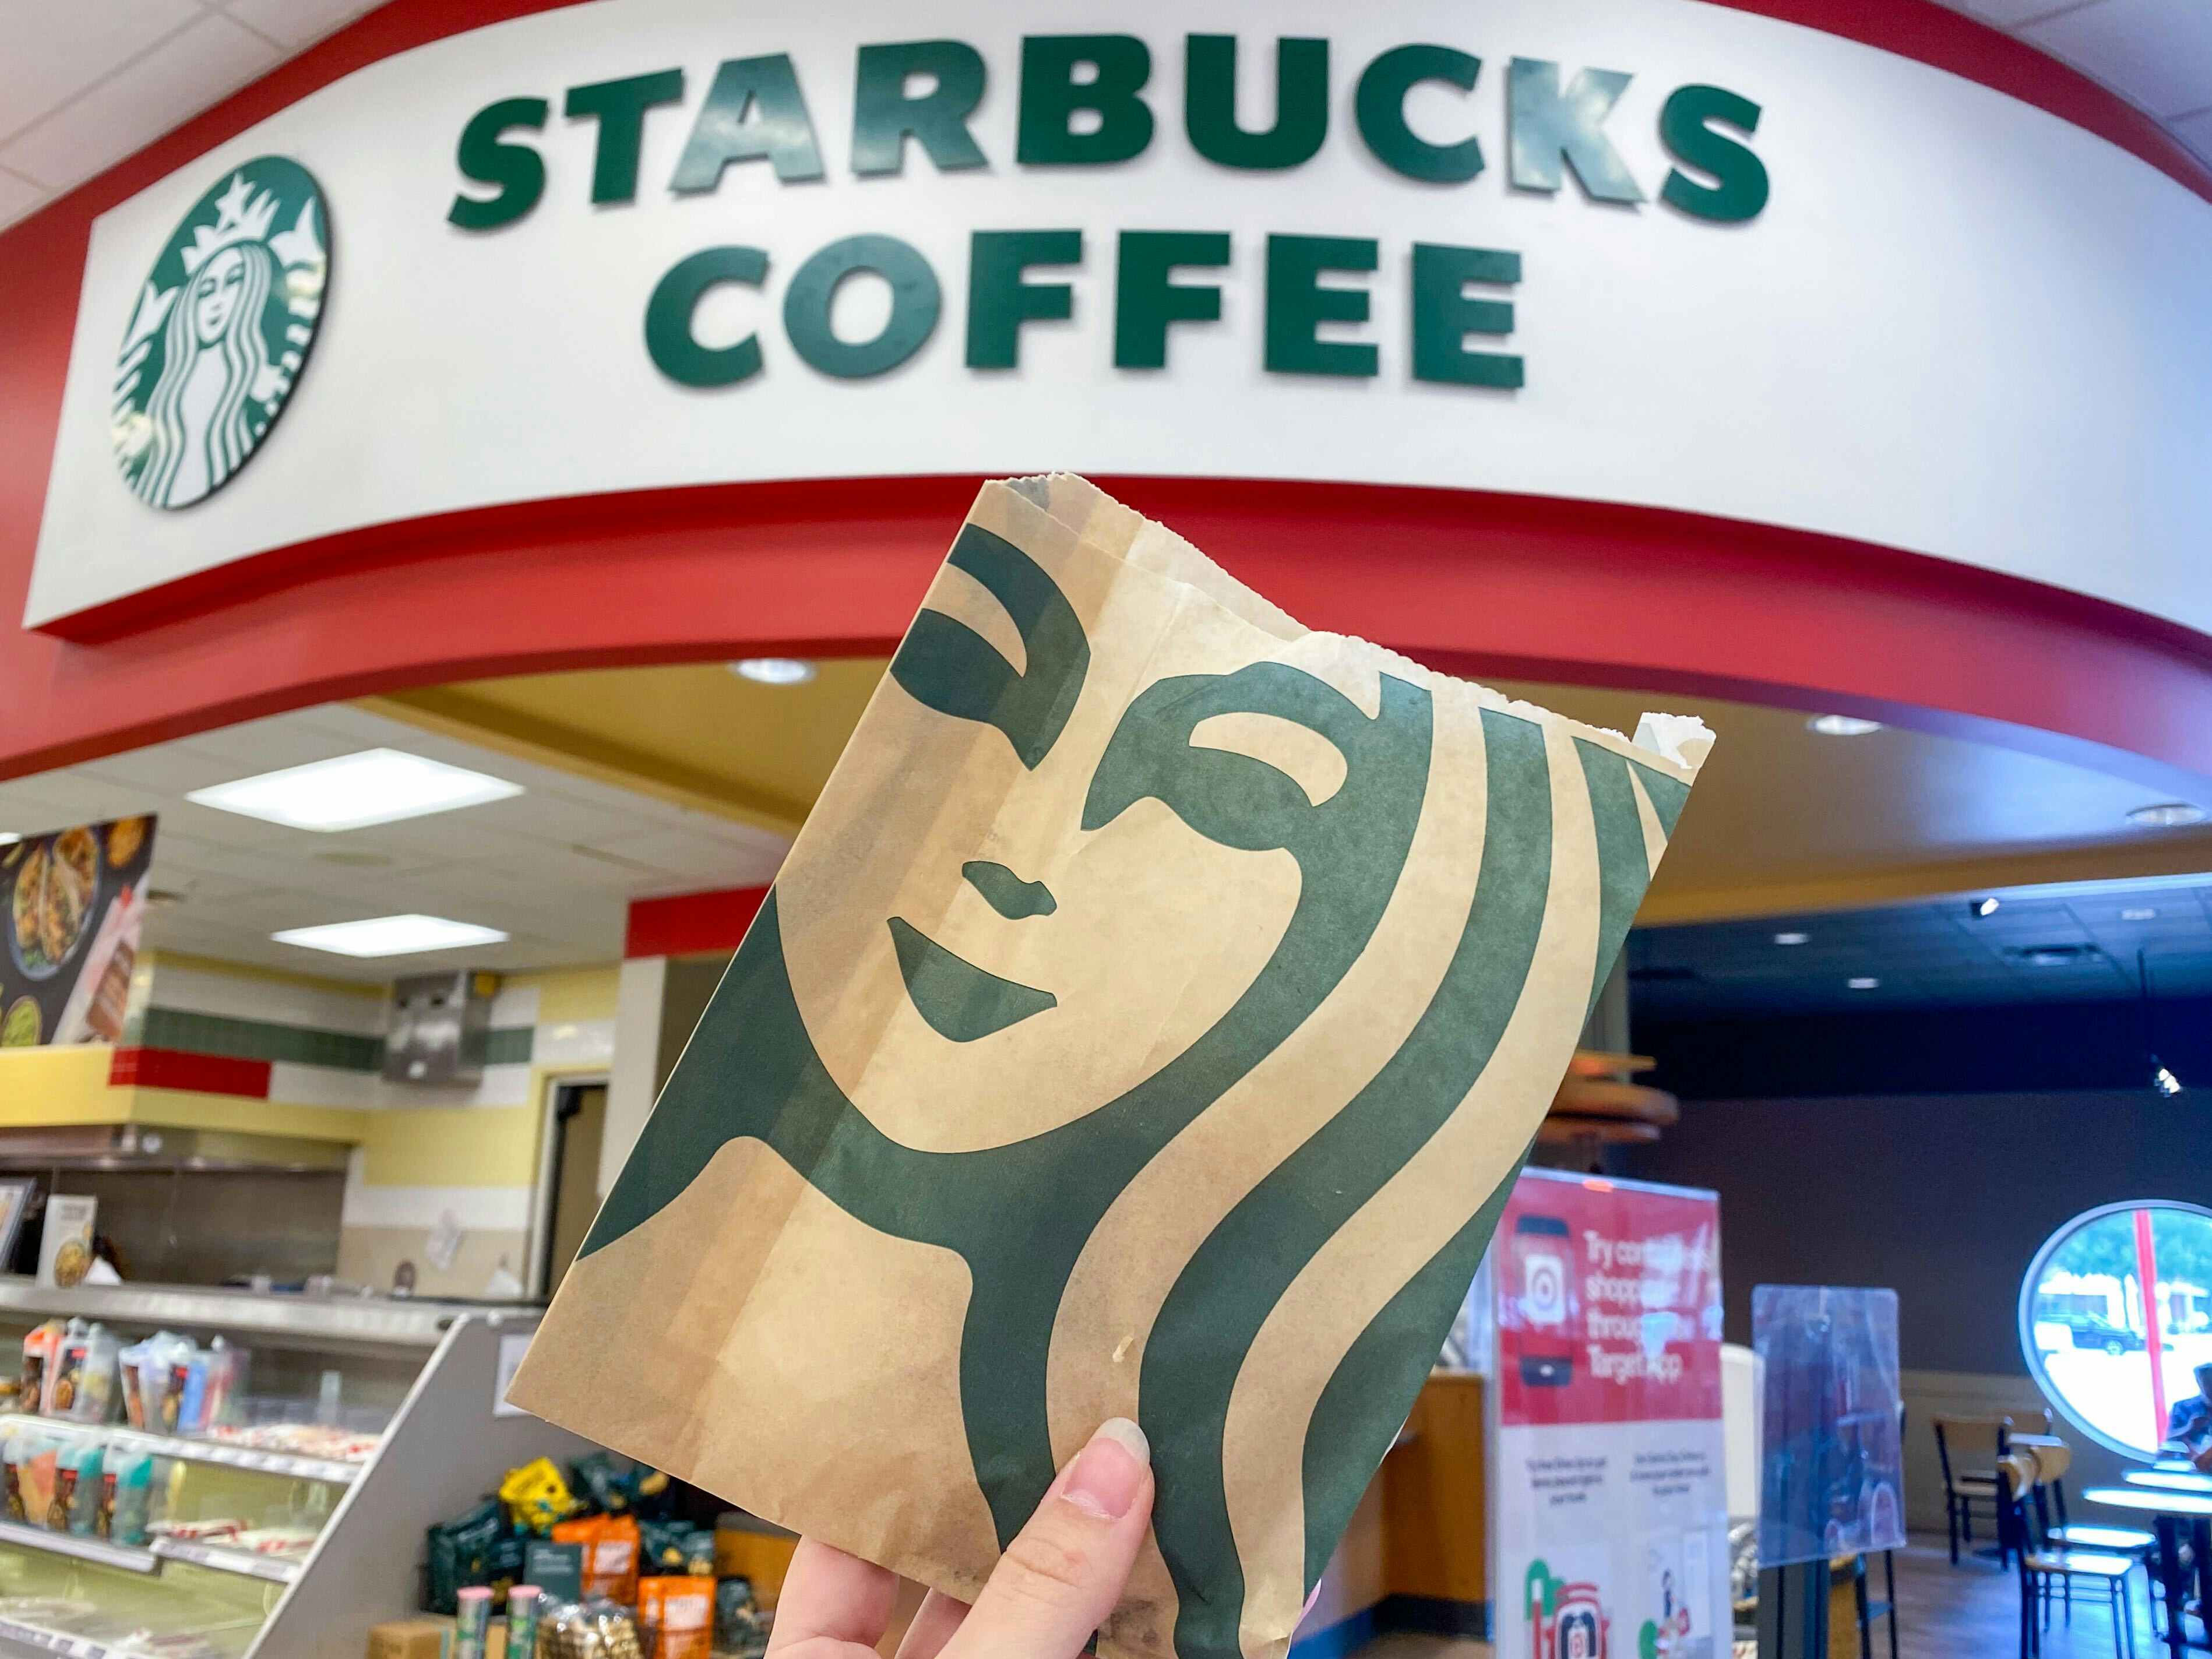 A person's hand holding up a Starbucks bag in front of the Starbucks Coffee sign inside Target.